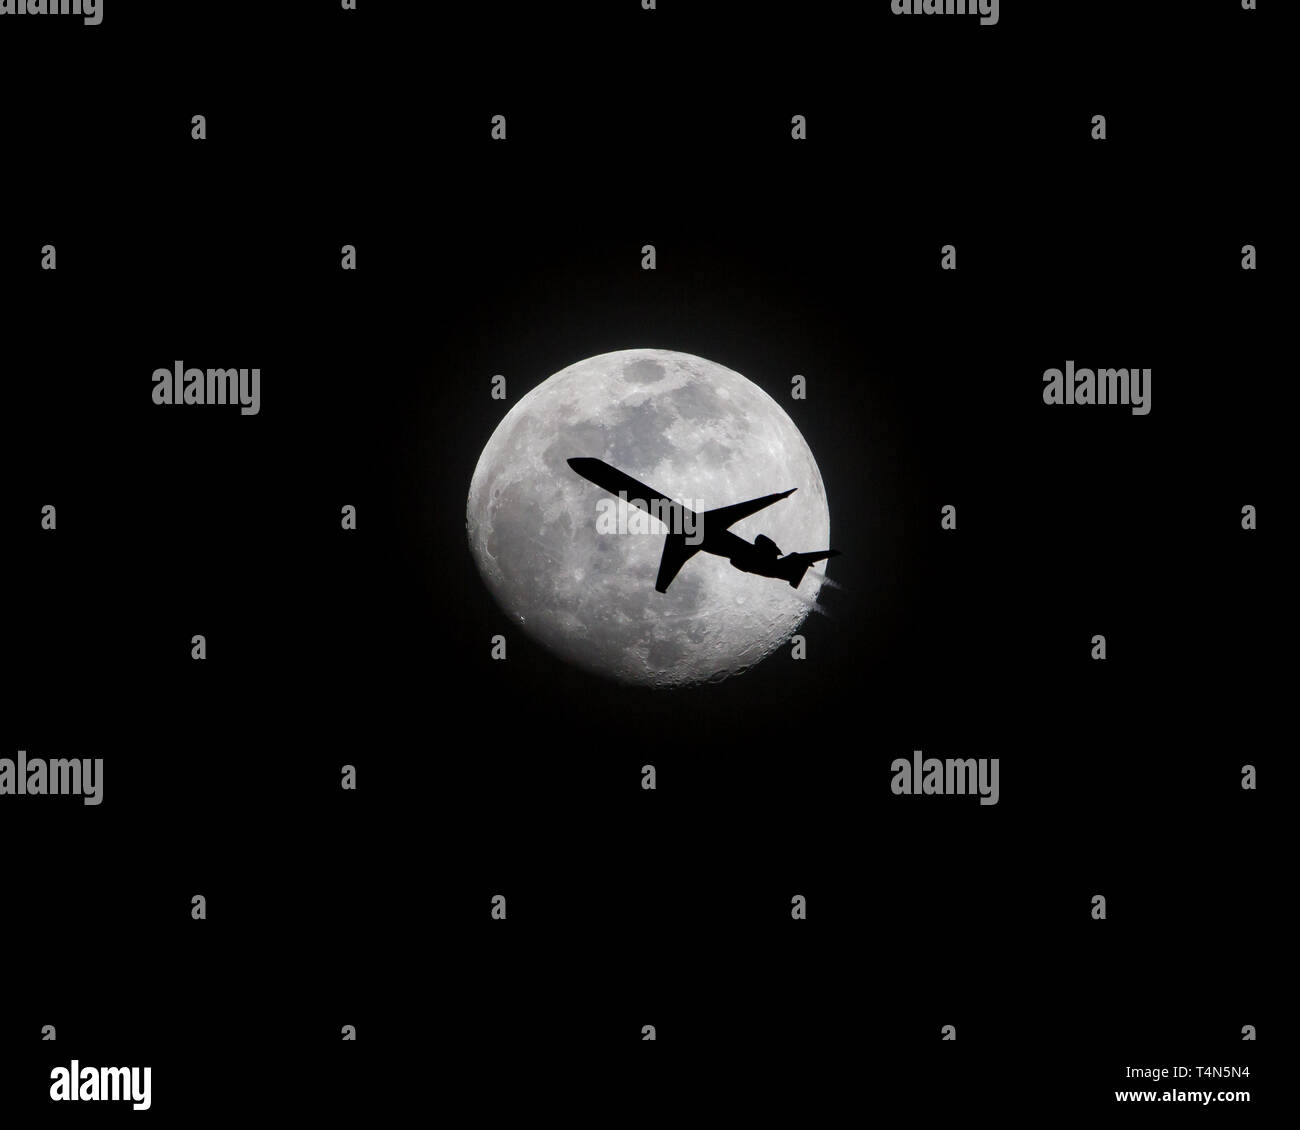 Commercial Airliner Passing in Front of a Full Moon Stock Photo